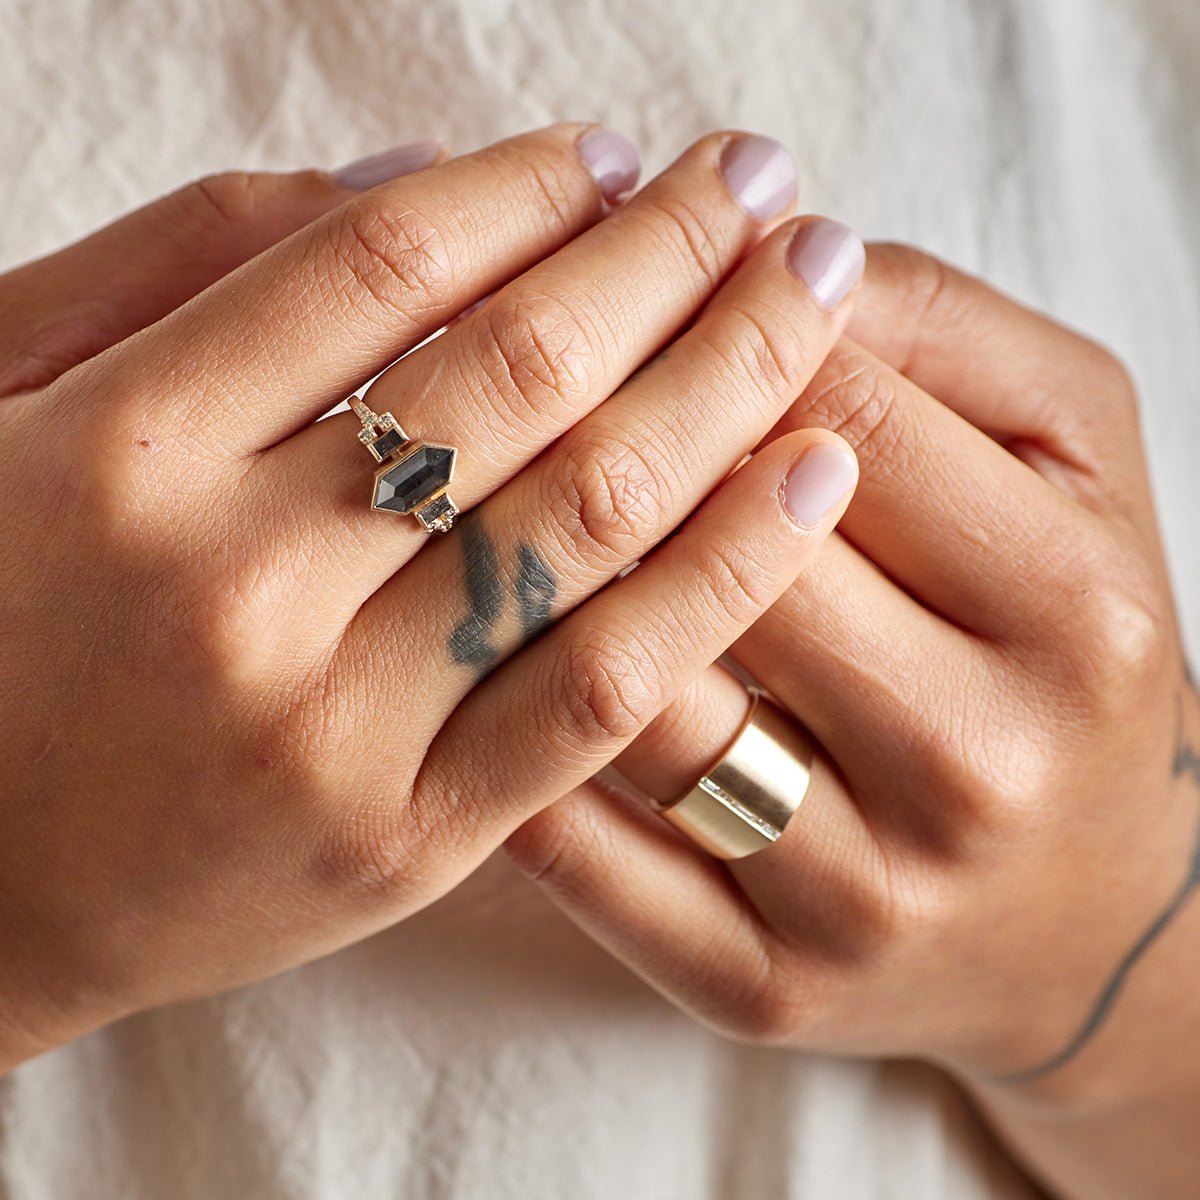 Model wears the Libero ring on their right hand, and the Decus ring on their left hand.